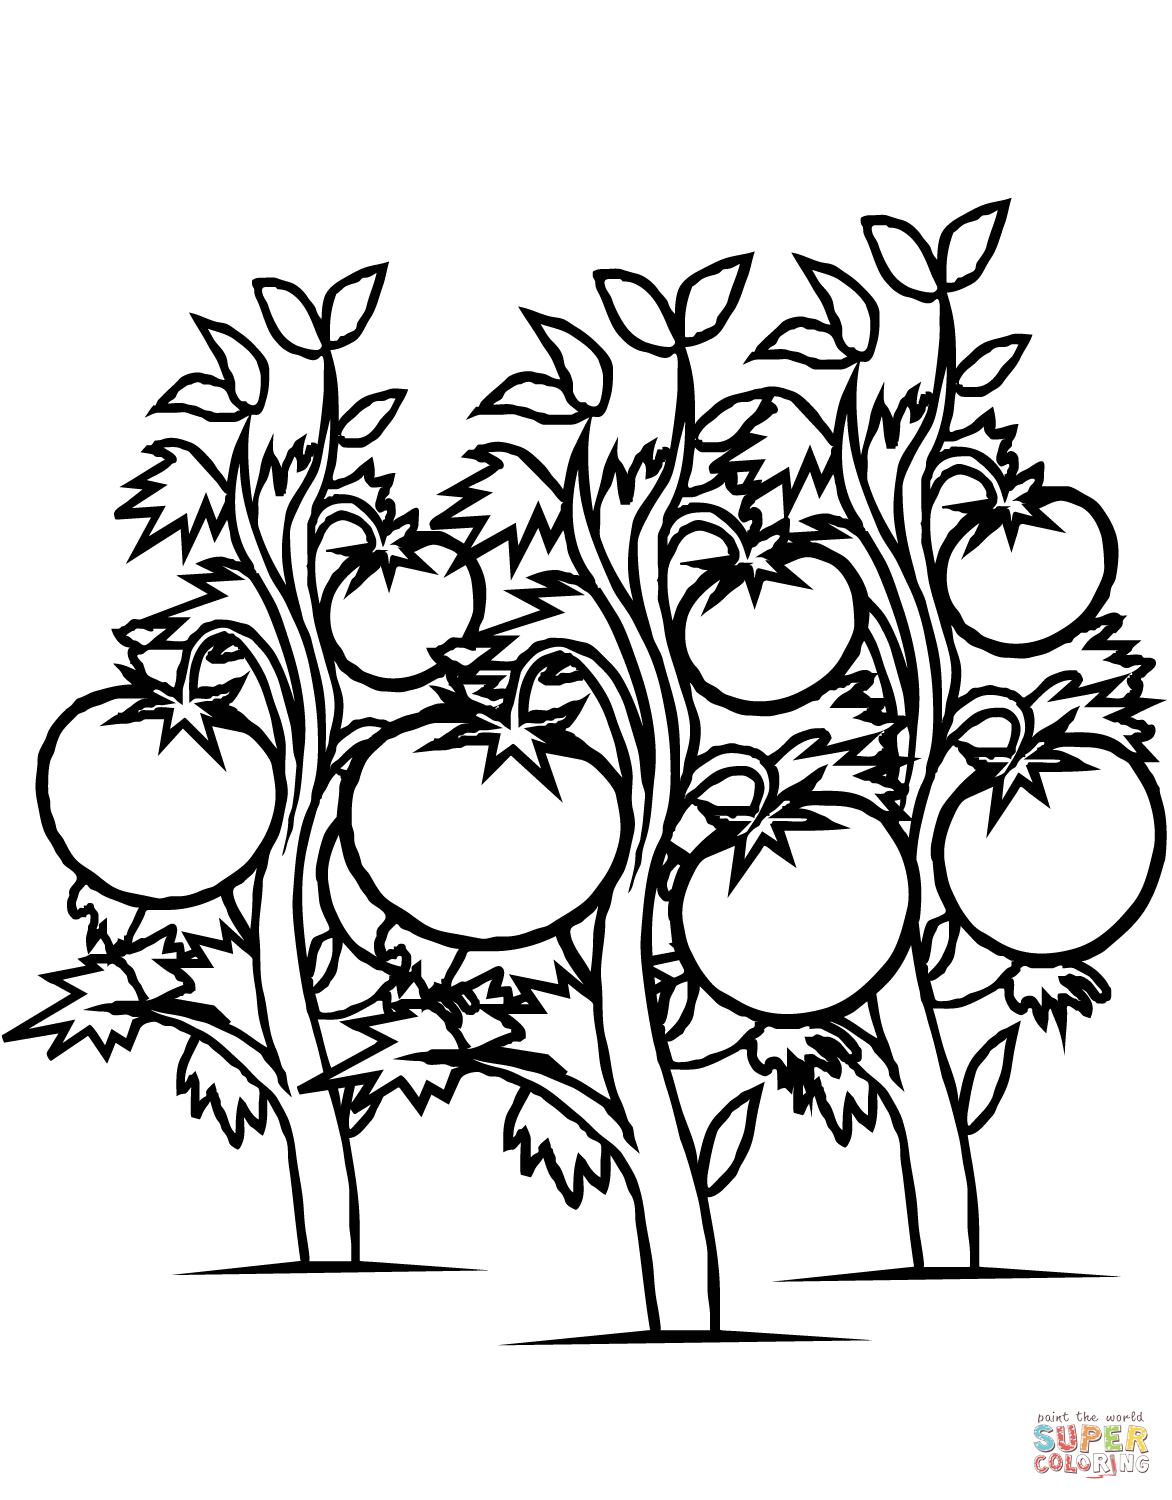 Tomatoes Plants coloring page | Free Printable Coloring Pages